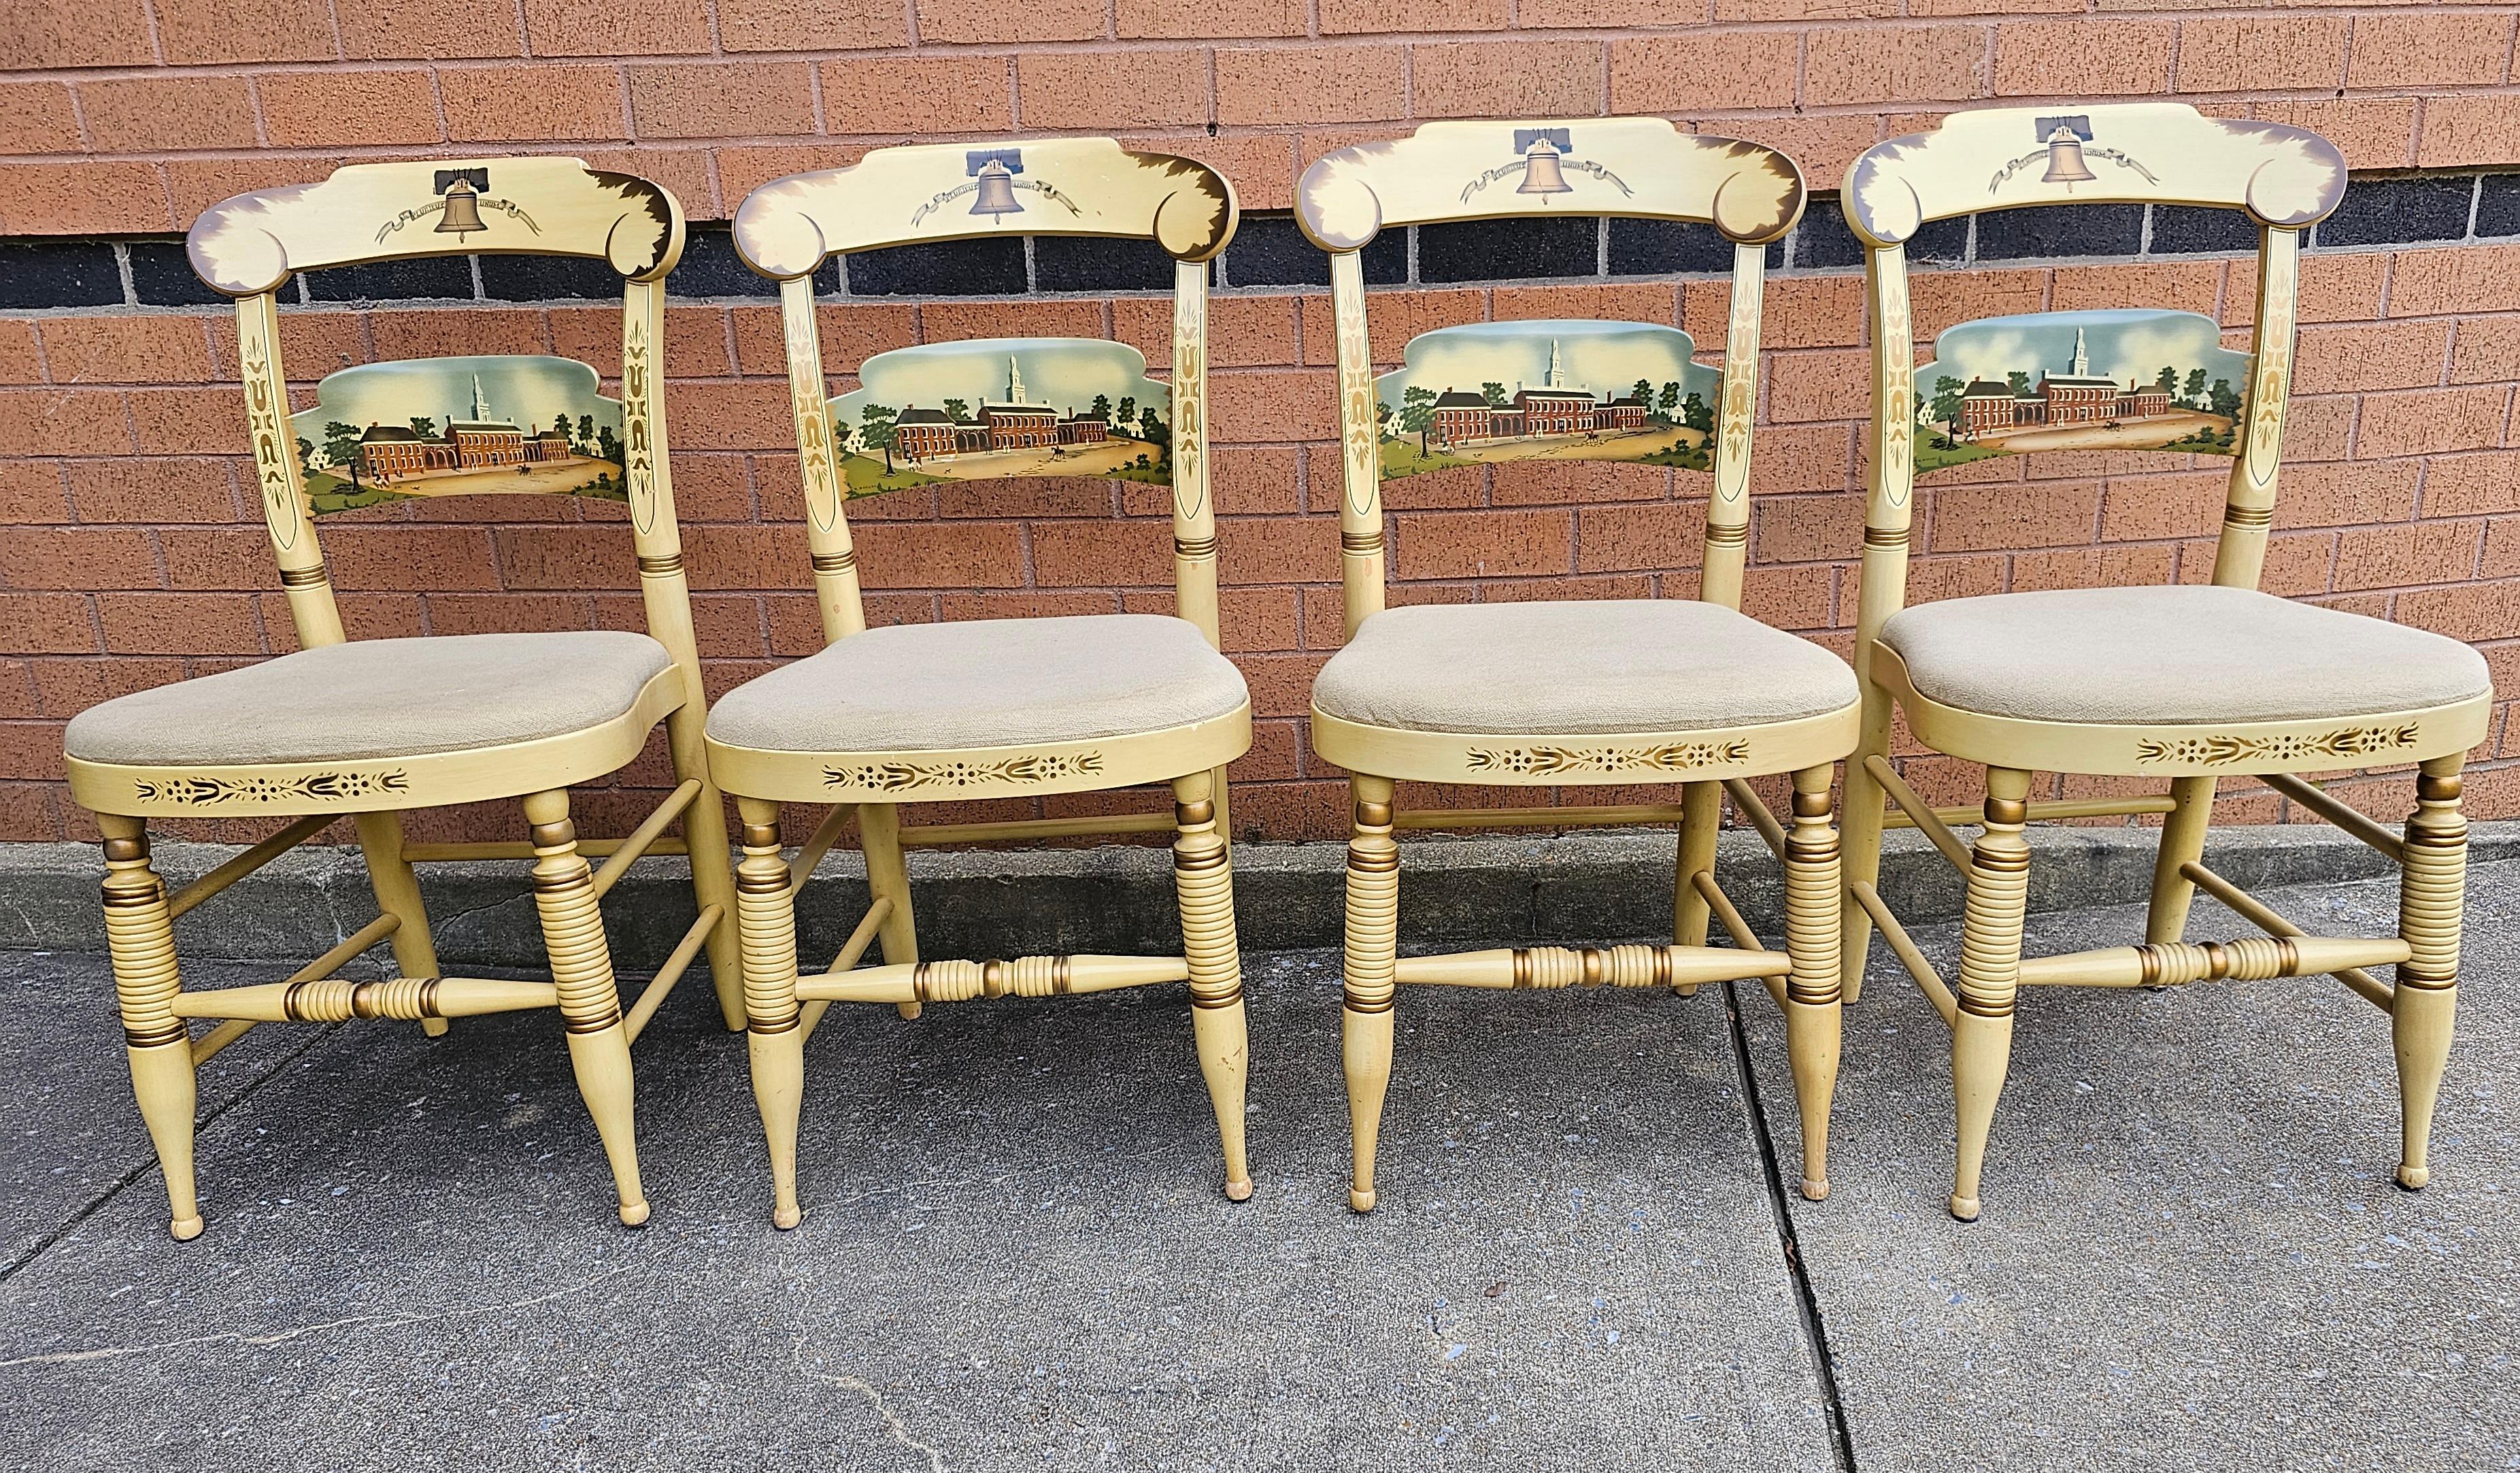 Fabulous Set Of Four Hitchcock Chair Company For Strawbridge & Clothier 'The Independence Chairs, Philadelphia', Limited Edition of 400. Great vintage condition. Creamy color with beige upholstery. Hand Painted independance bicentenary limited